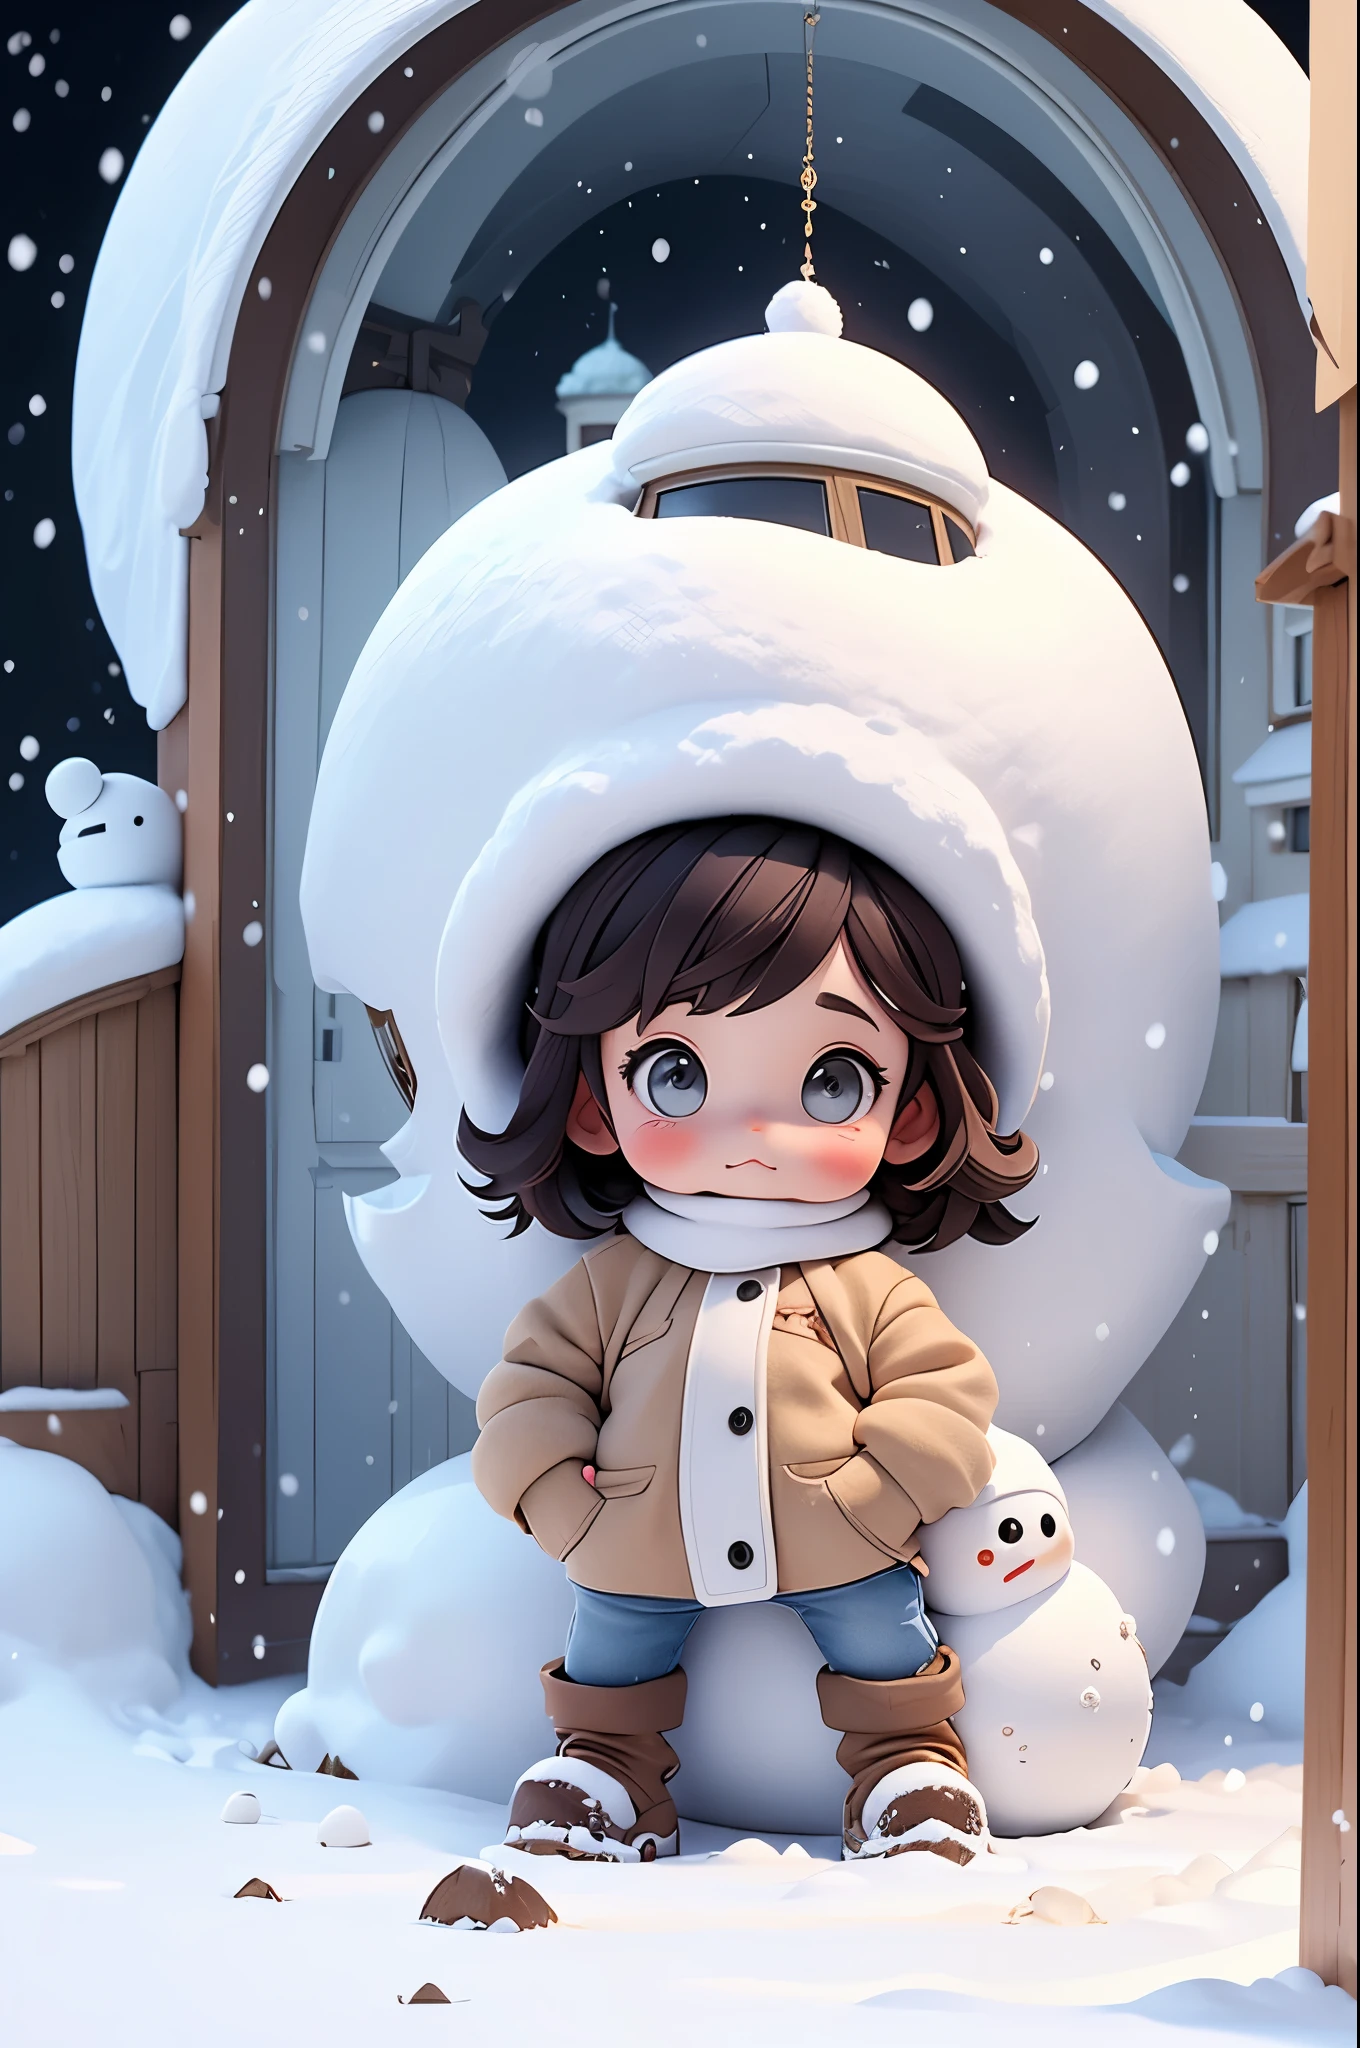 ((A girl doing bending exercises in front of a snow-covered dome house))、Snowman on background、Stronger bokeh effect